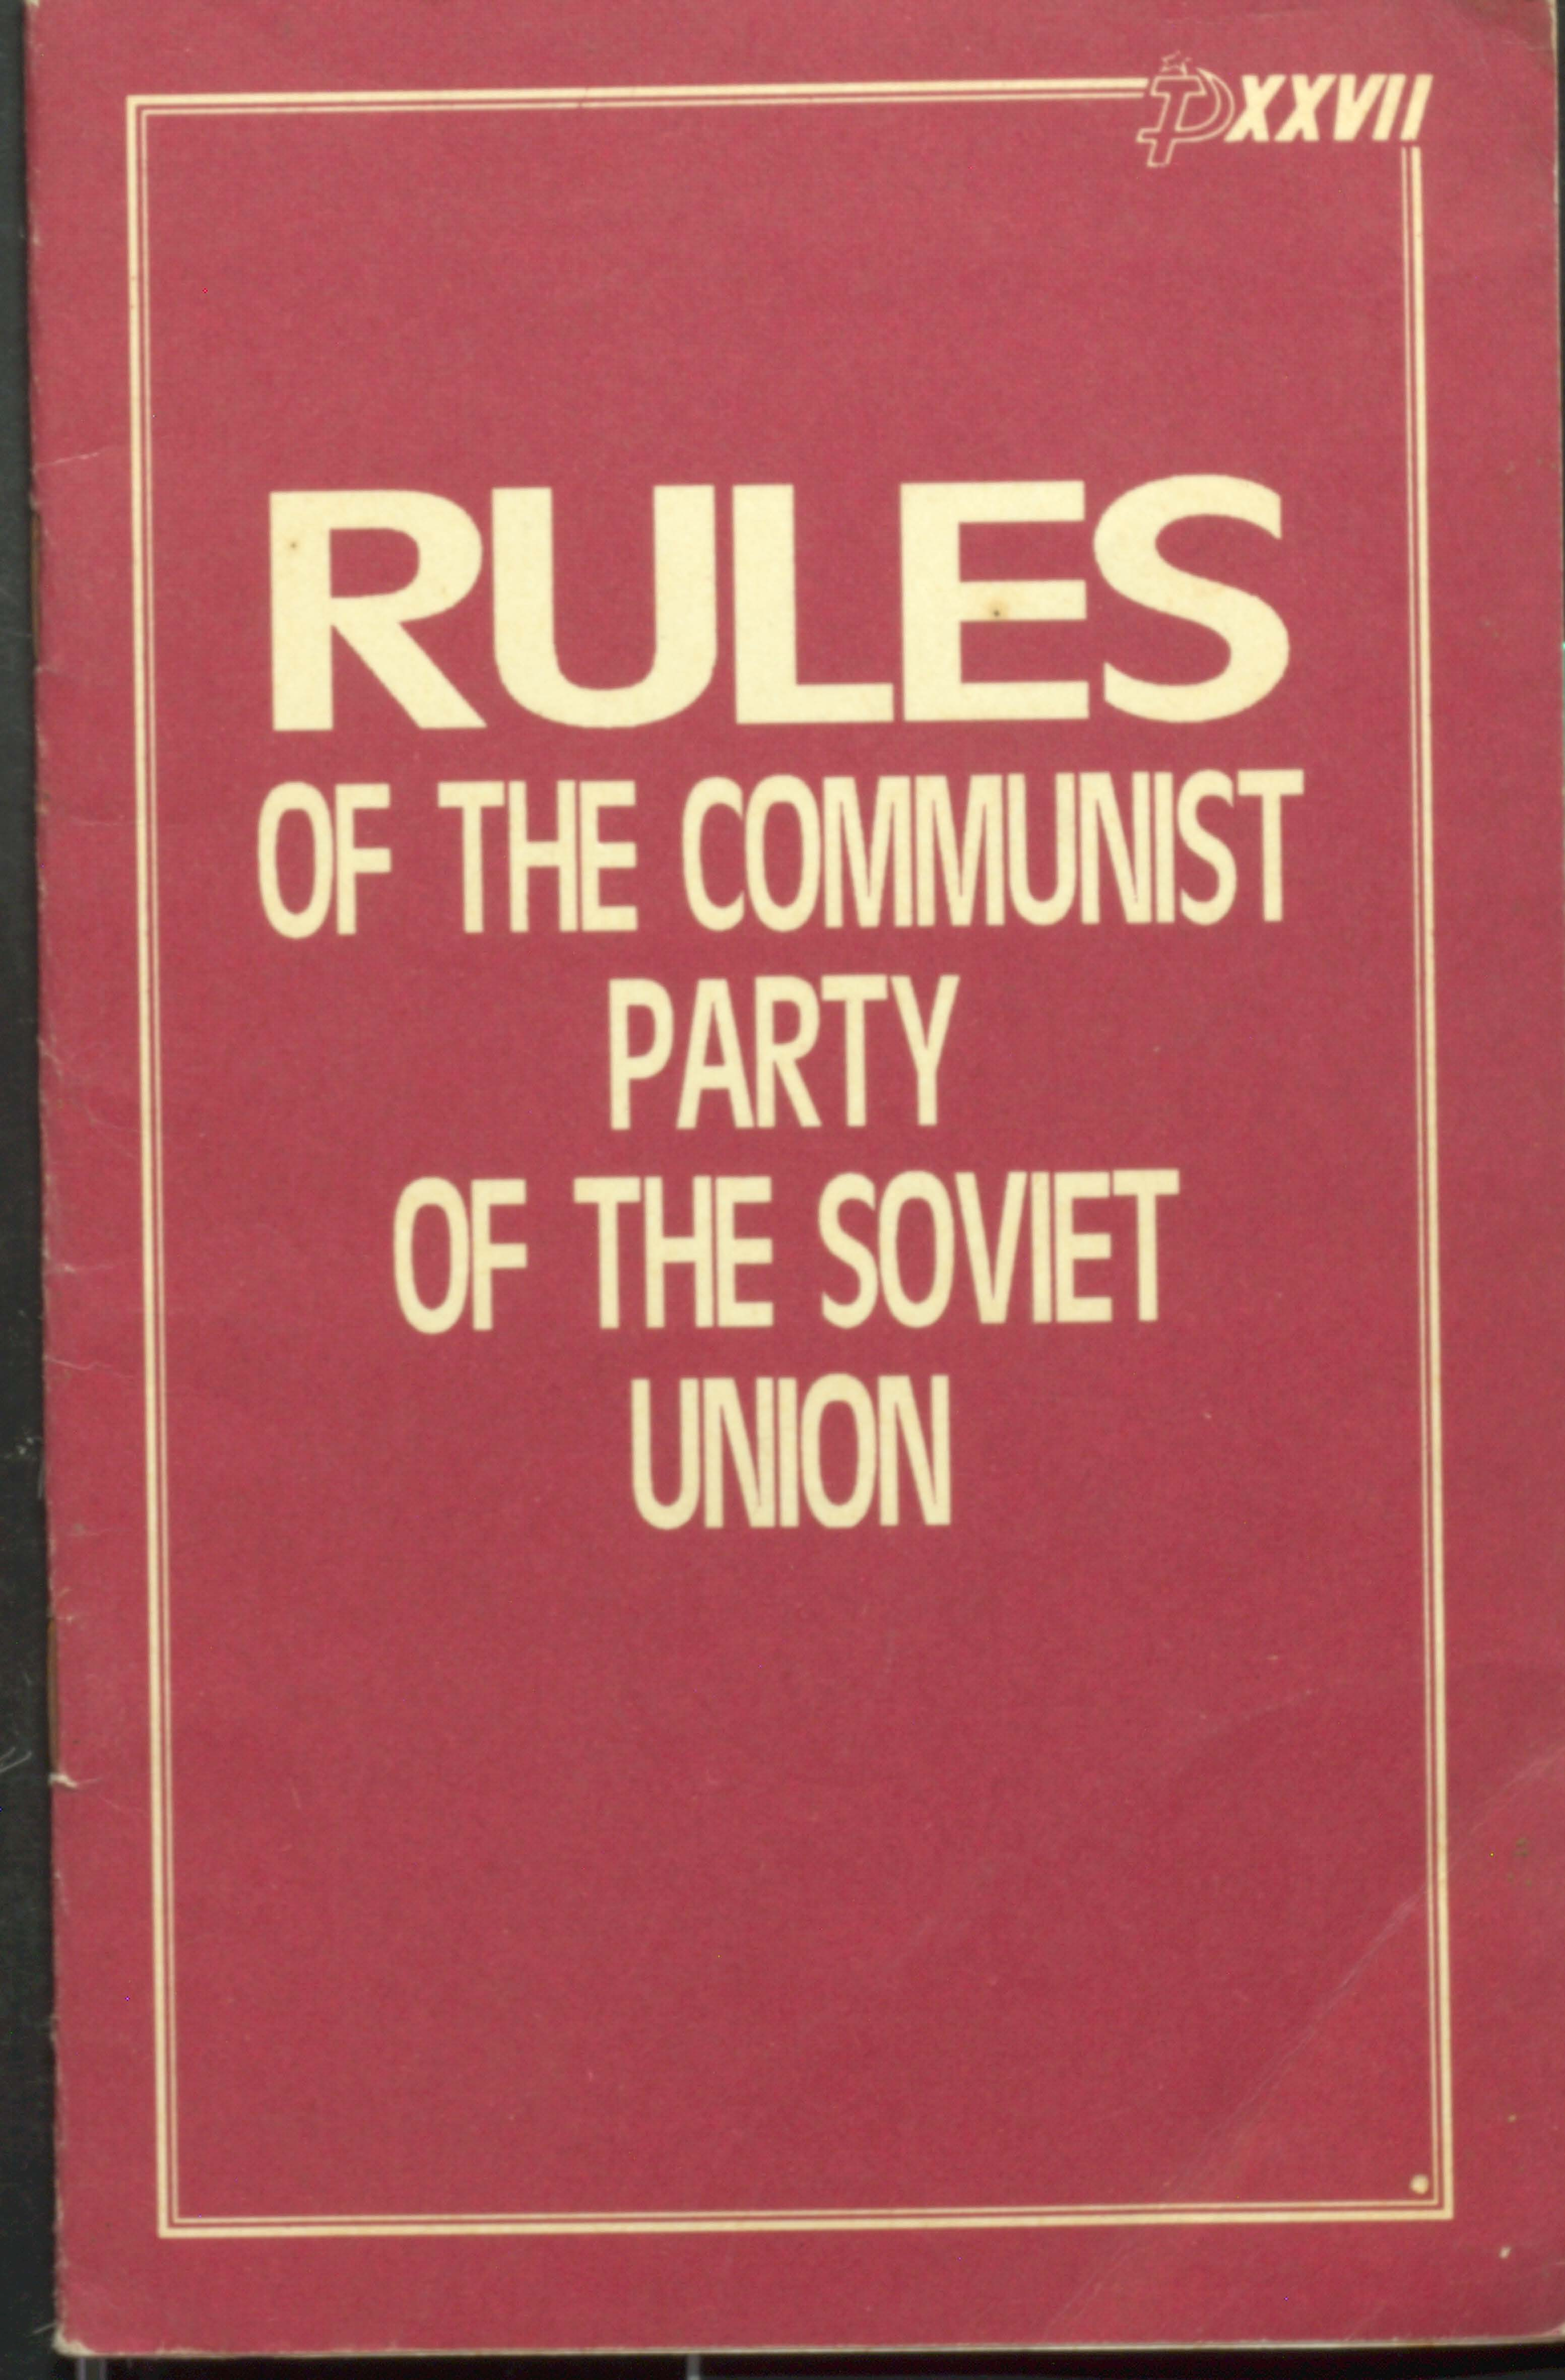 Rules of the communist party of the soviet union